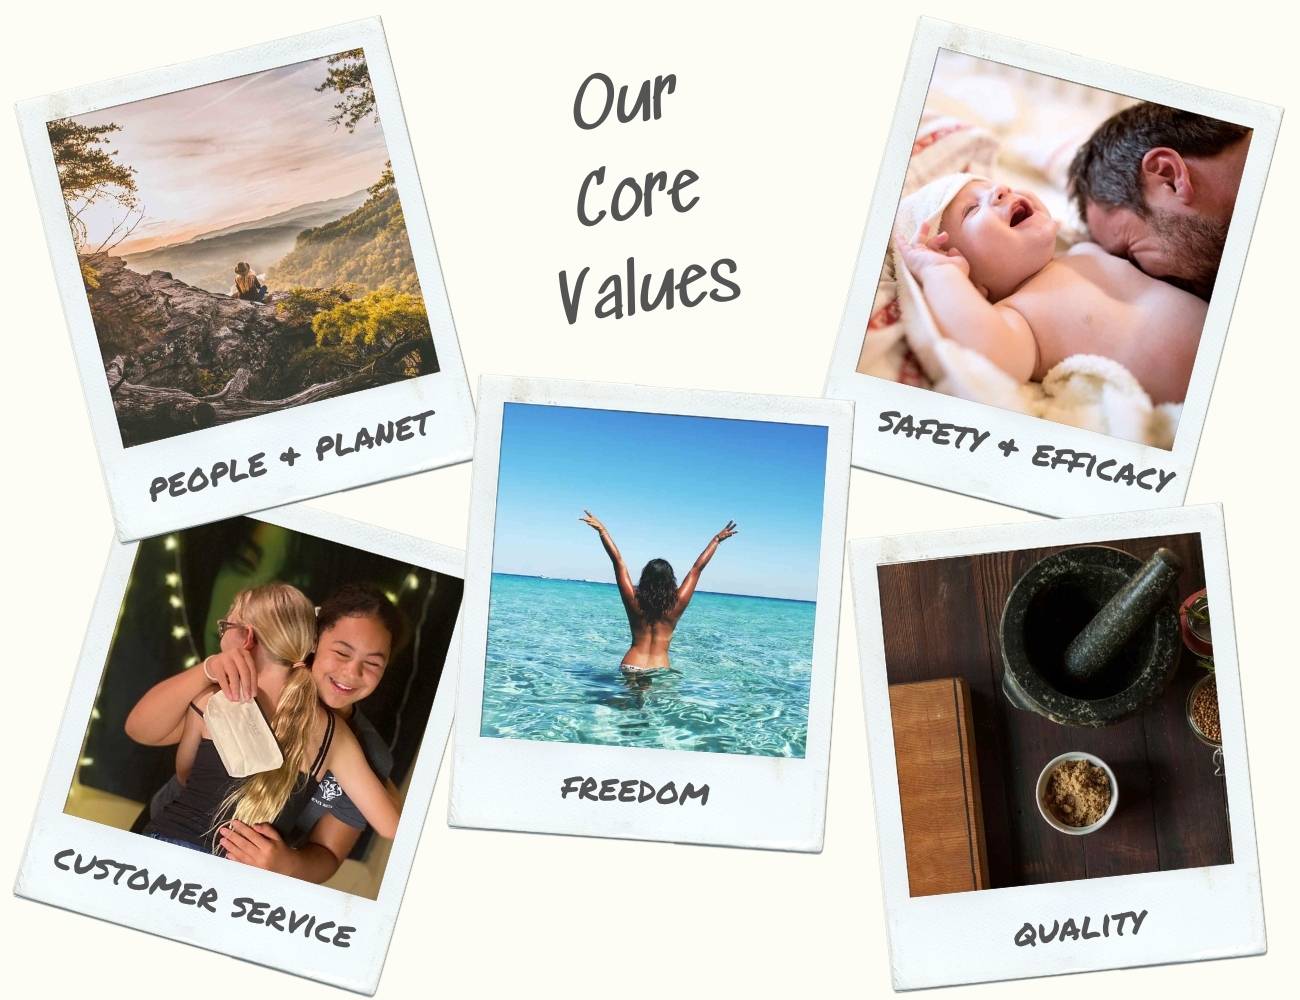 BEAUTY IN THE Raw Core Values freedom safety and efficacy quality customer service people and planet